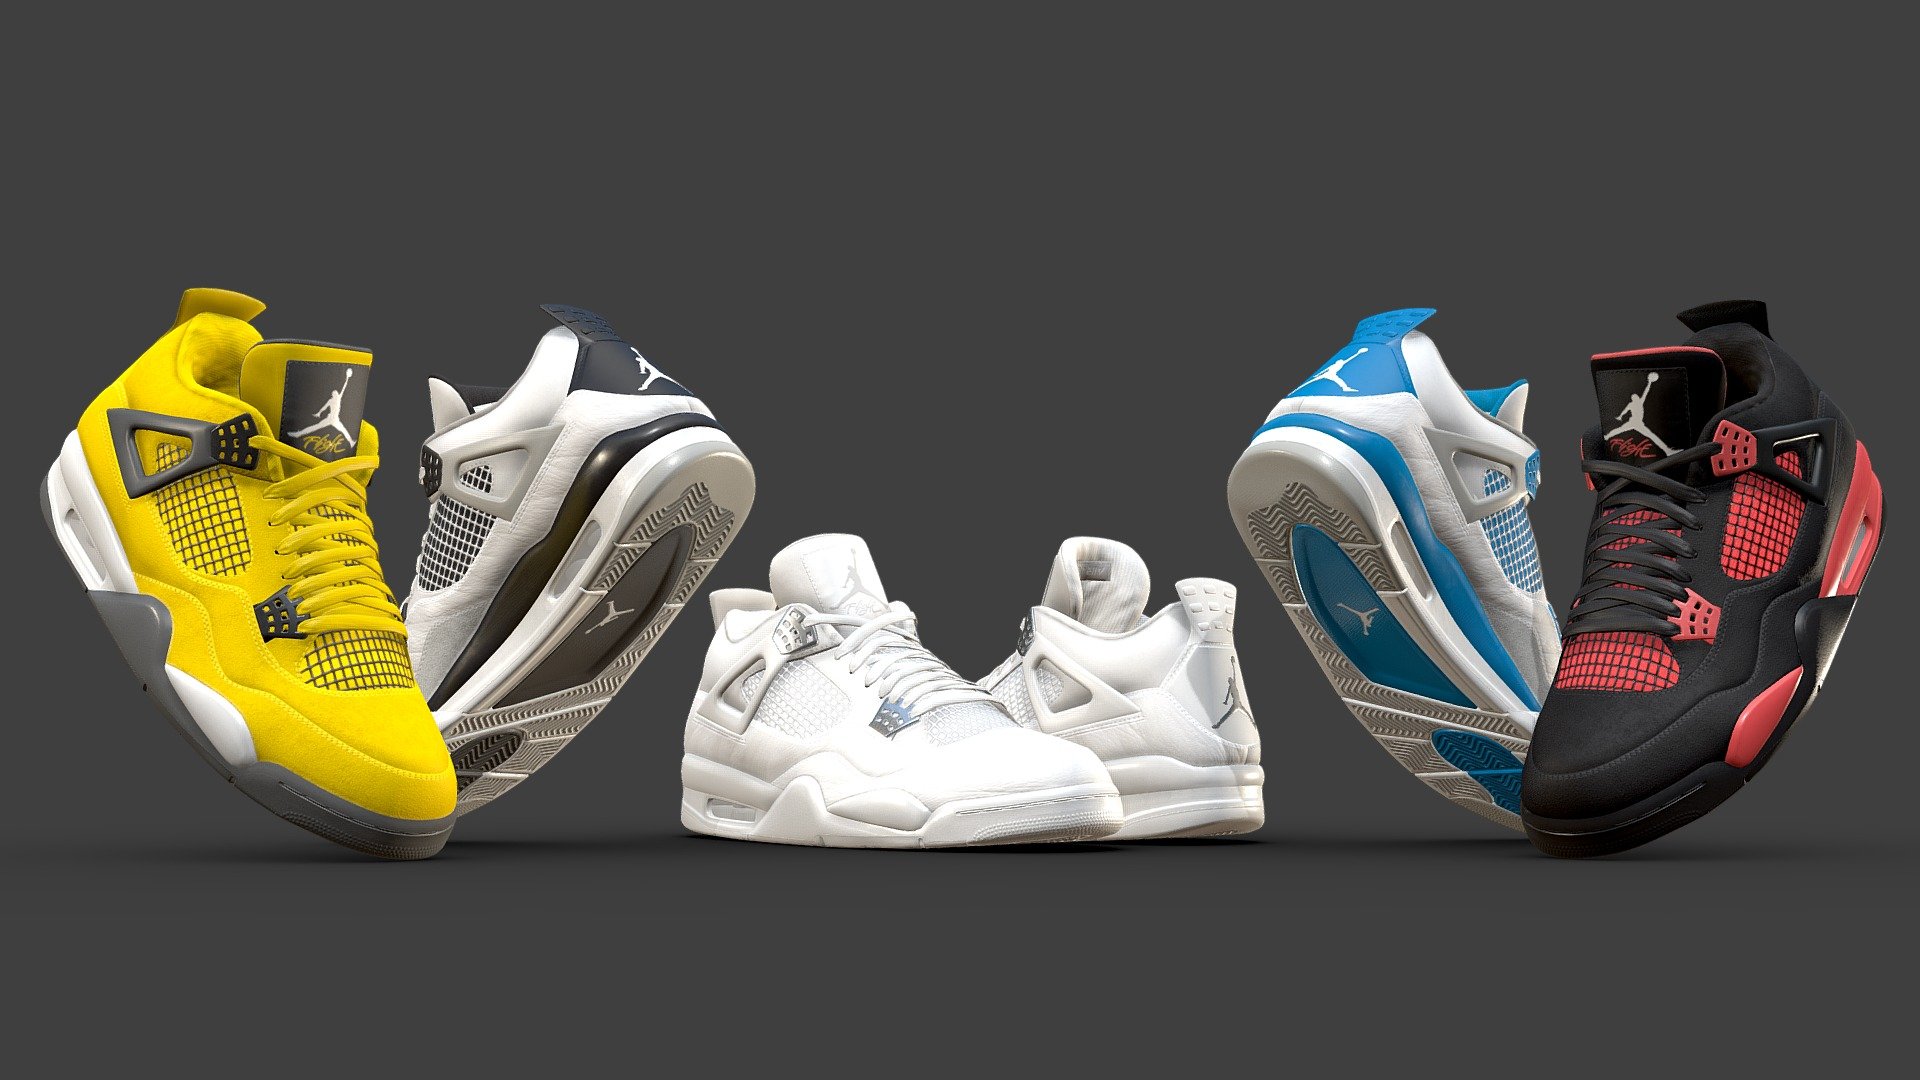 Full versions with a greater level of detail and higher resolition textures are available here: https://skfb.ly/oAqxK

Optimised, low poly version of my Jordan 4 model in 5 colourways. The mesh uses just one texture set that covers both shoes and each shoe has a polycount of 24,167. This version would be ideal for in game use, or as an accessory to a render where the shoes are not the focus. The high detailed version of this model can be purchased here: 

Clean, quad topology was used throughout the shoe.

The five colourways included are: Pure Money, Red Thunder, Military Black, Lightning, Military Blue - Nike Air Jordan 4 Variety Pack - Buy Royalty Free 3D model by Joe-Wall (@joewall) 3d model